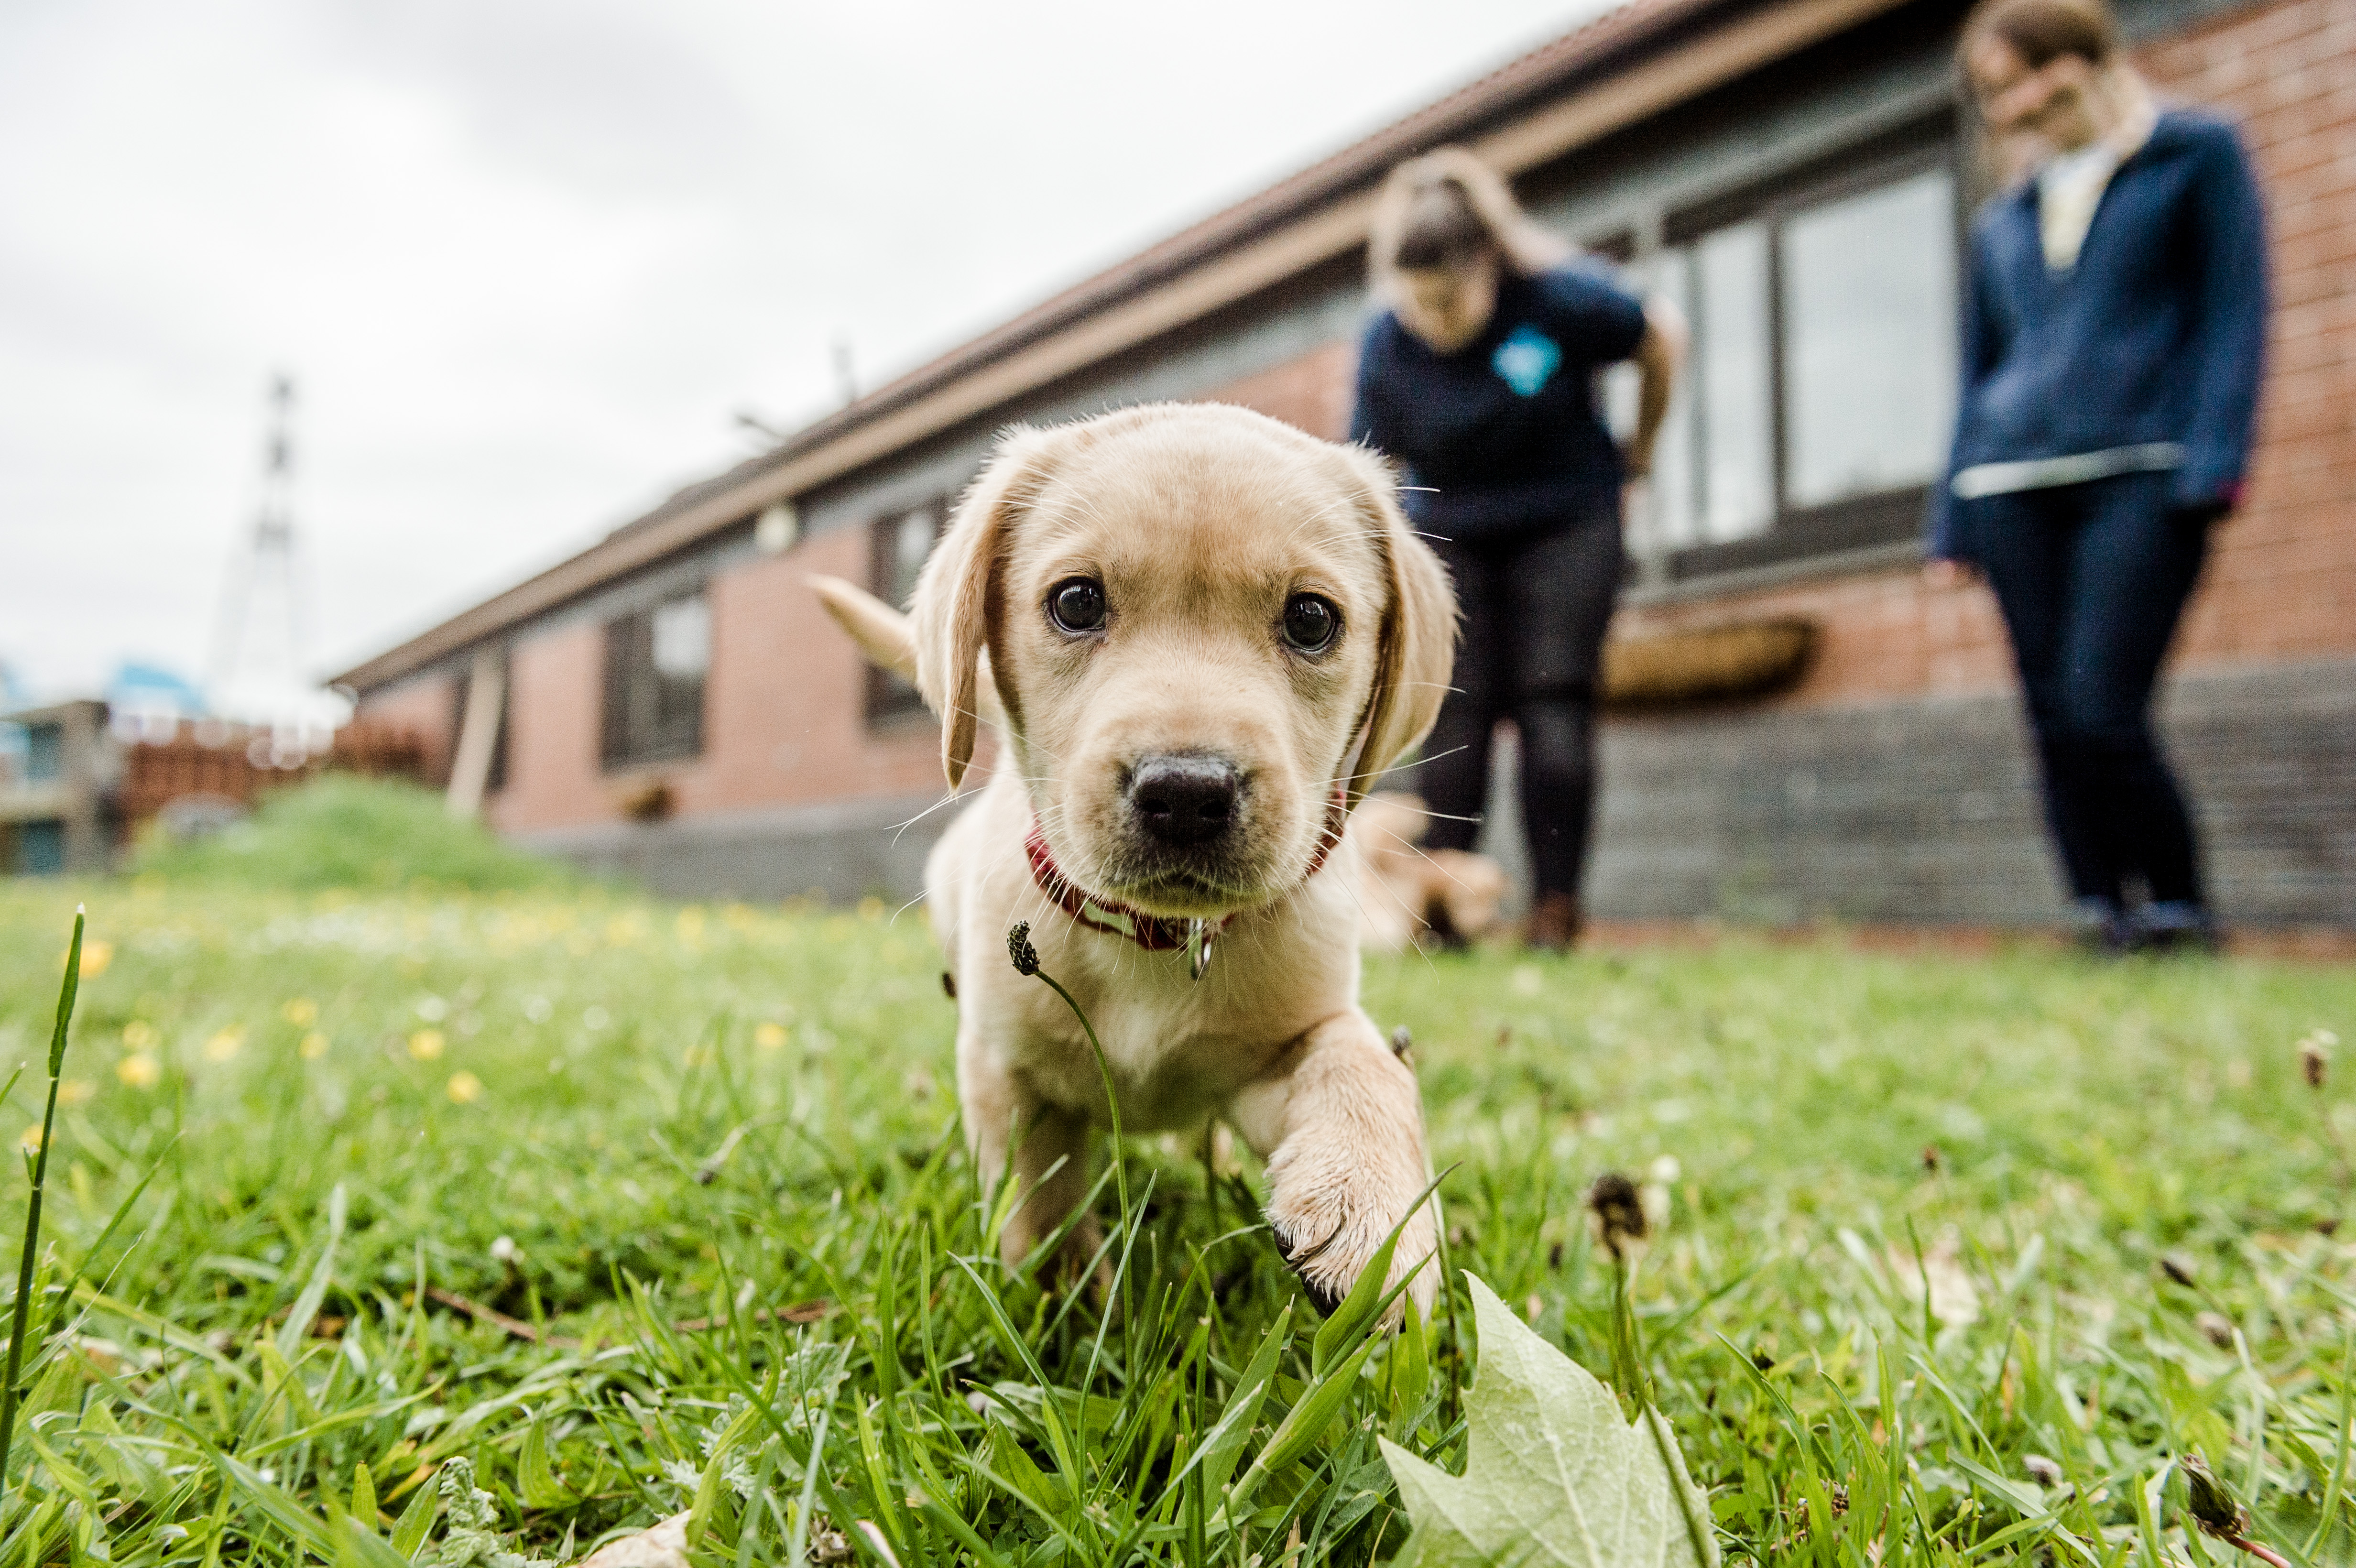 Yellow Labrador puppy on grass with two Blue Cross staff members in the background